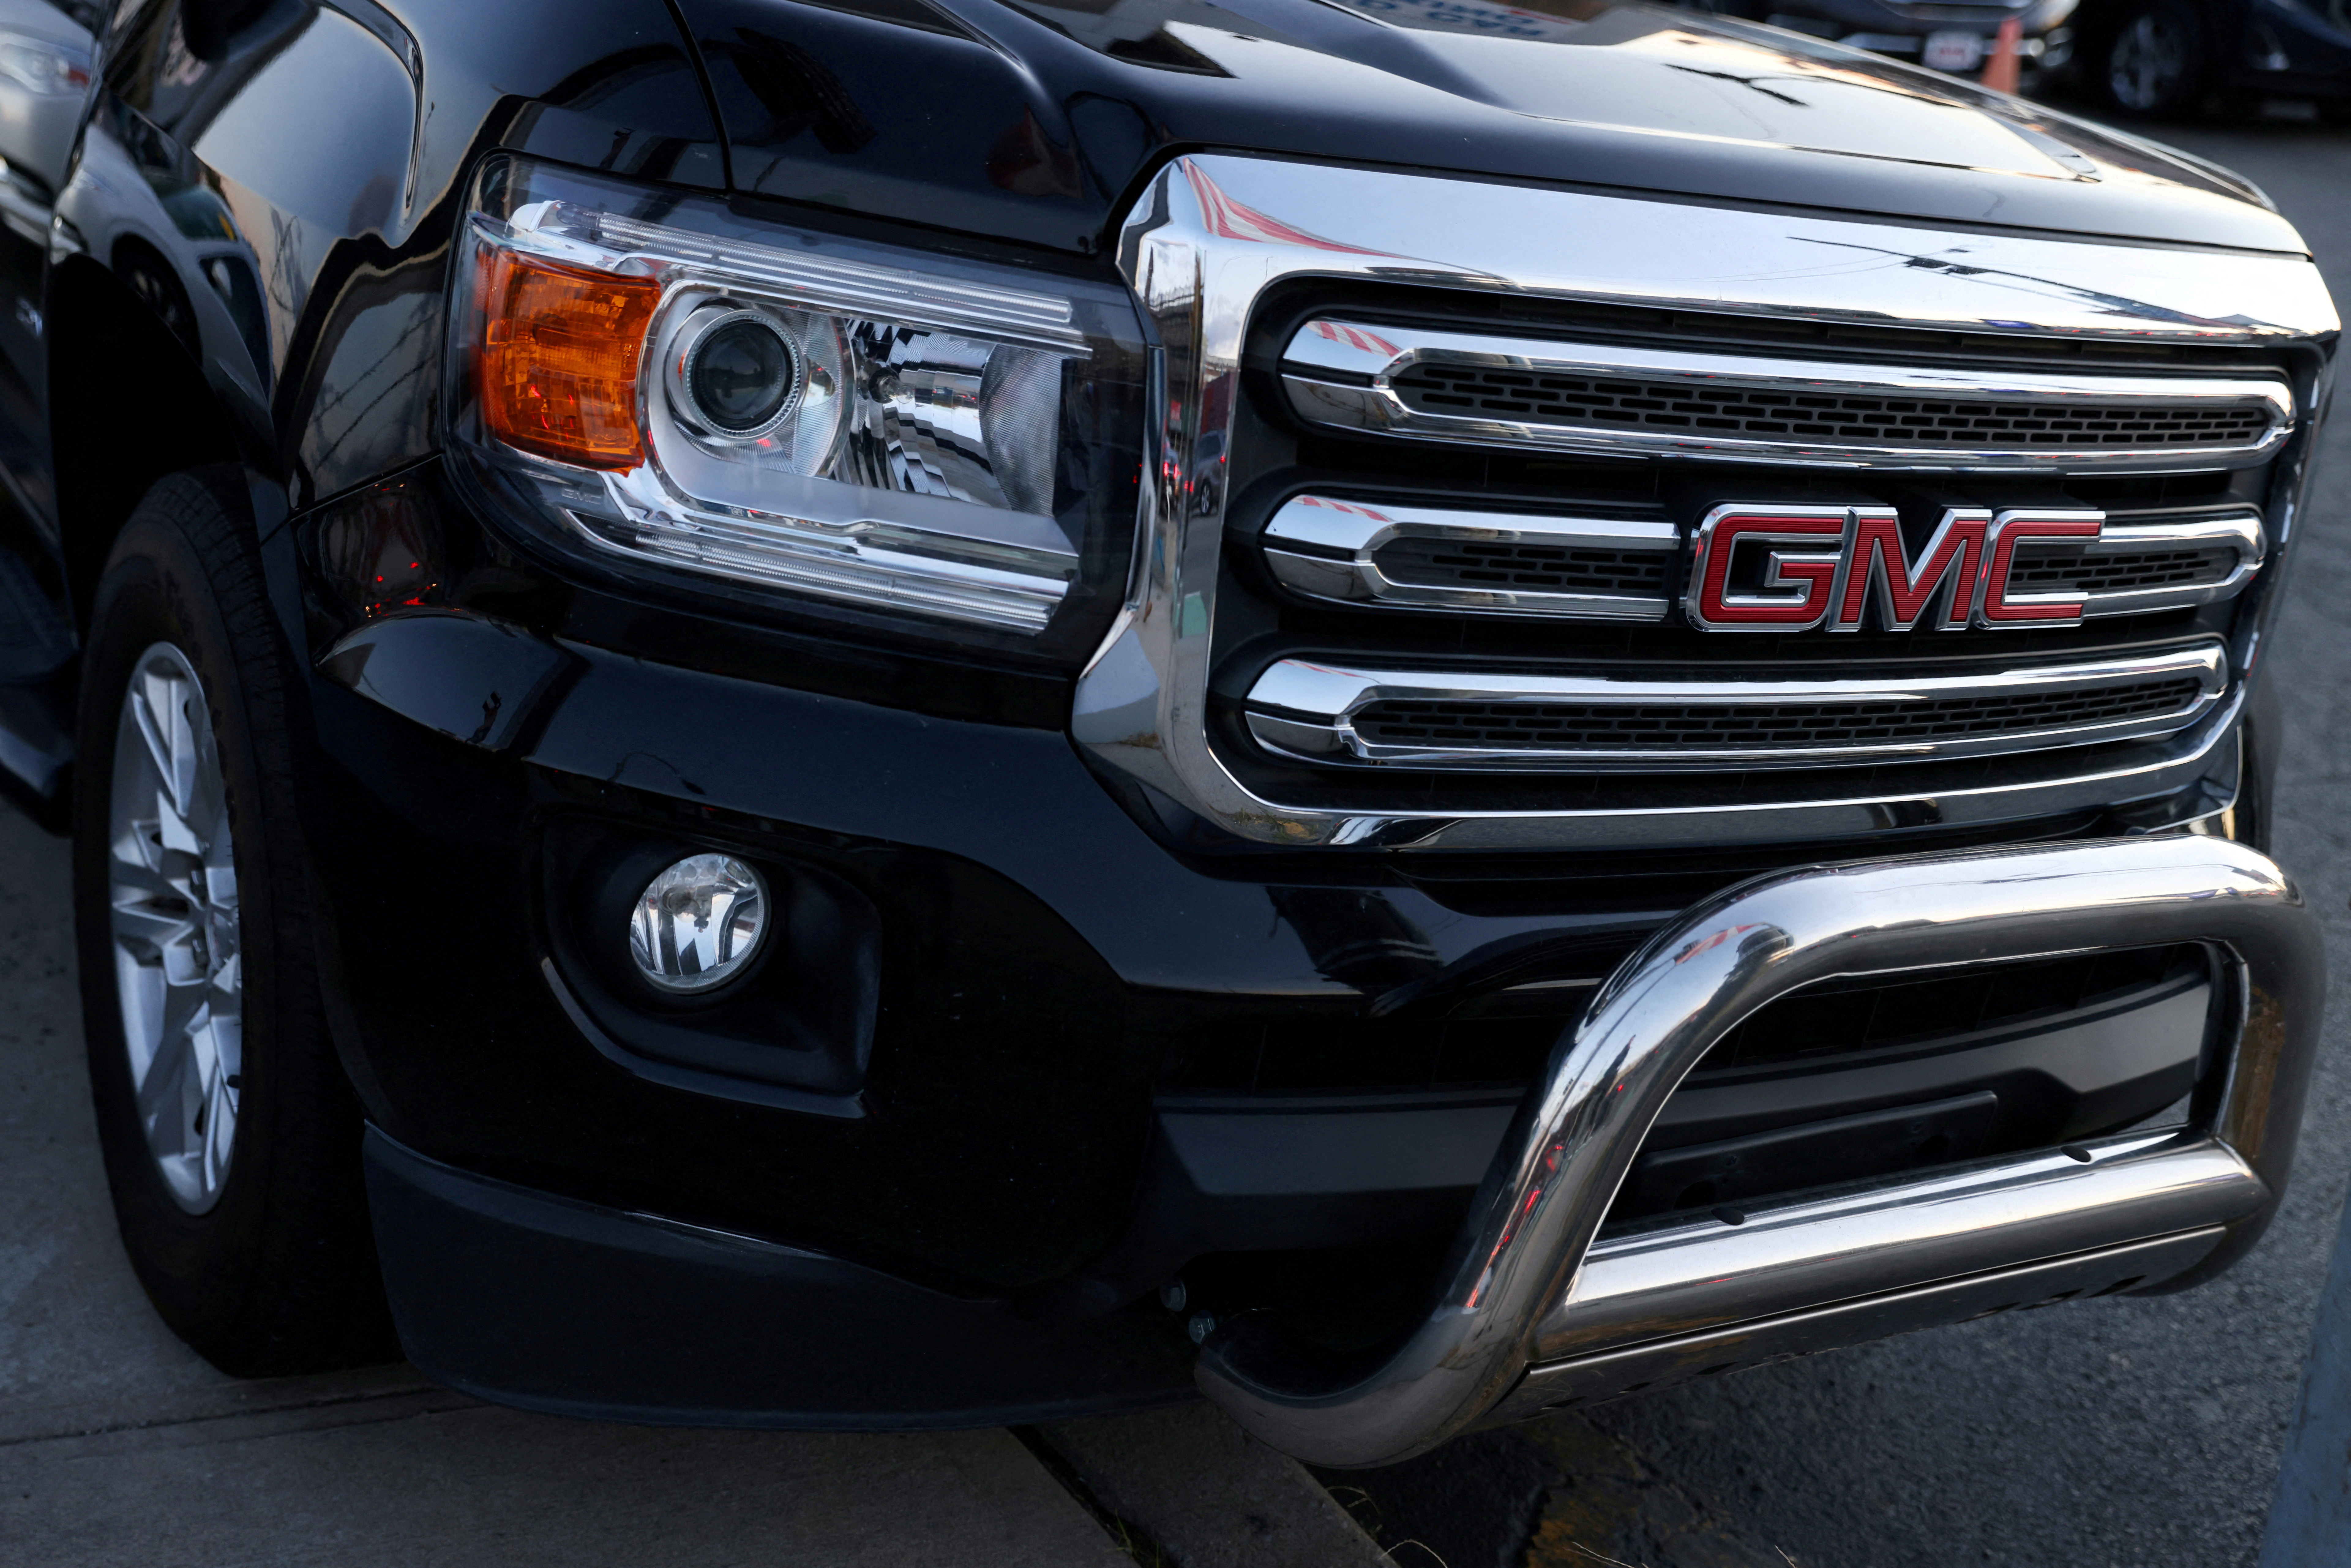 A badge of GMC, an automobile brand owned by General Motors Company, is seen on the grill of a vehicle for sale at a car dealership in Queens, New York